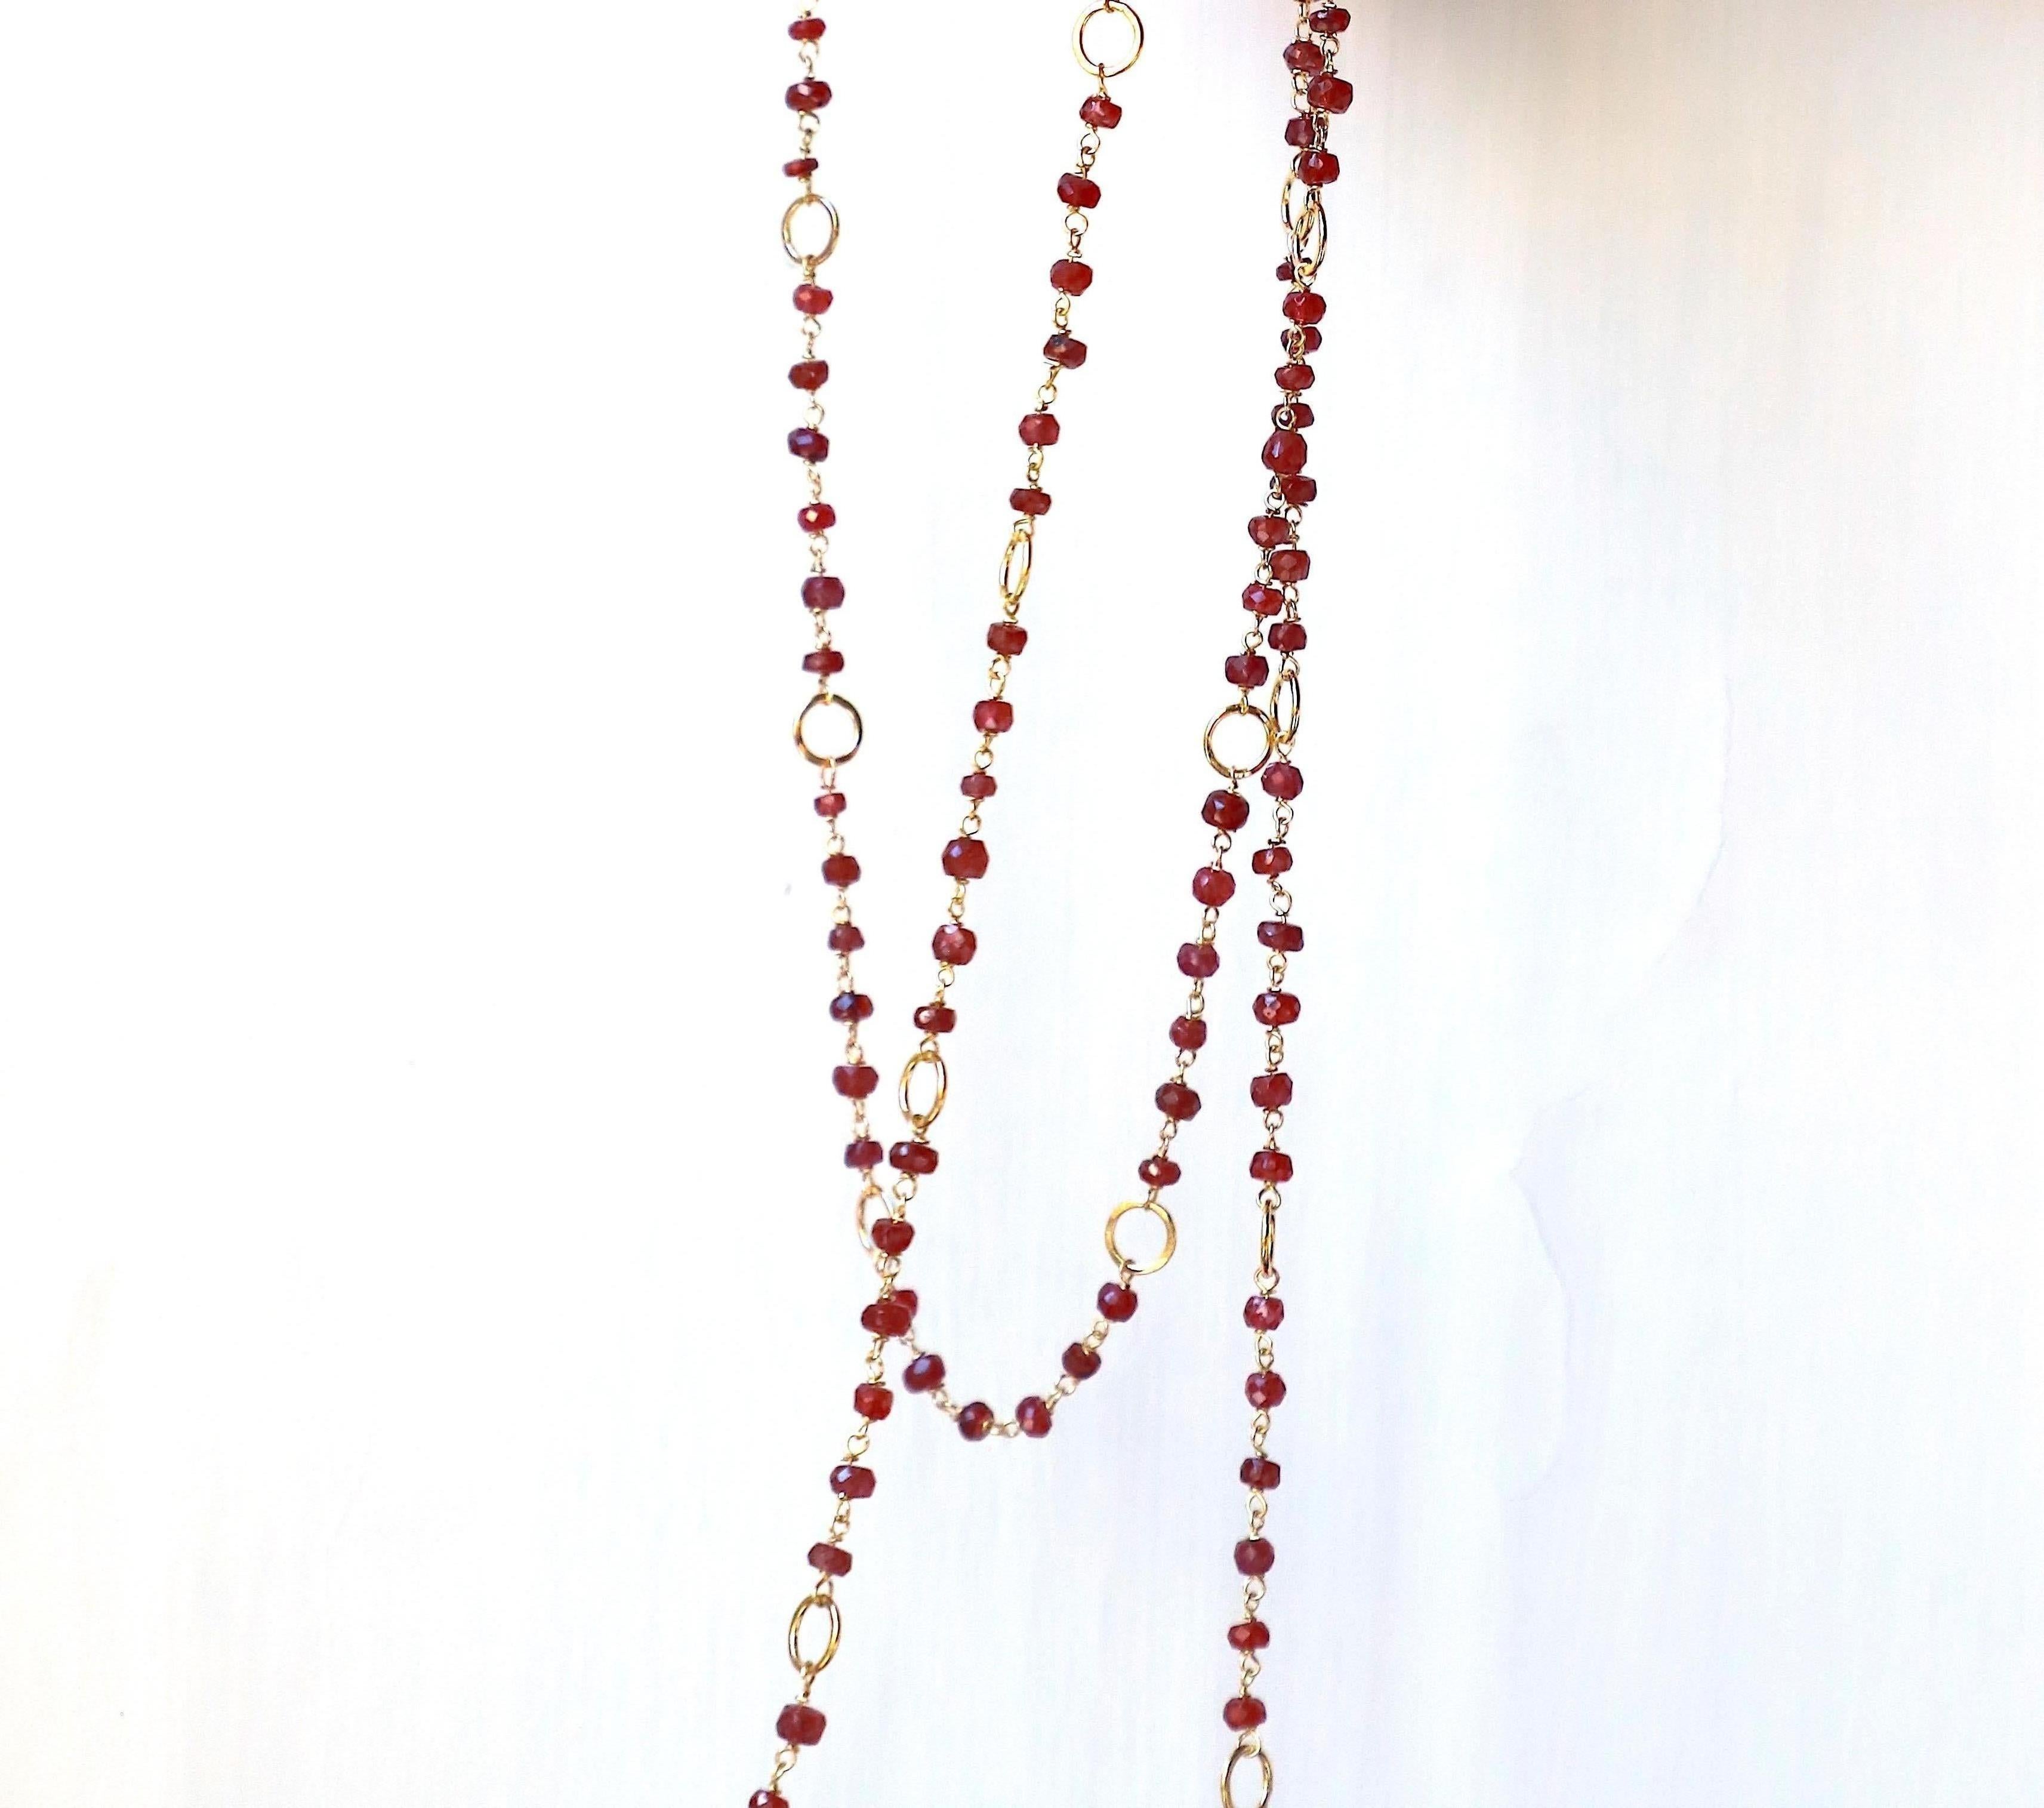 Art Deco Style 18Karat Yellow Gold Hammered Links Garnet Beaded Necklace Sautoir In New Condition For Sale In Rome, IT